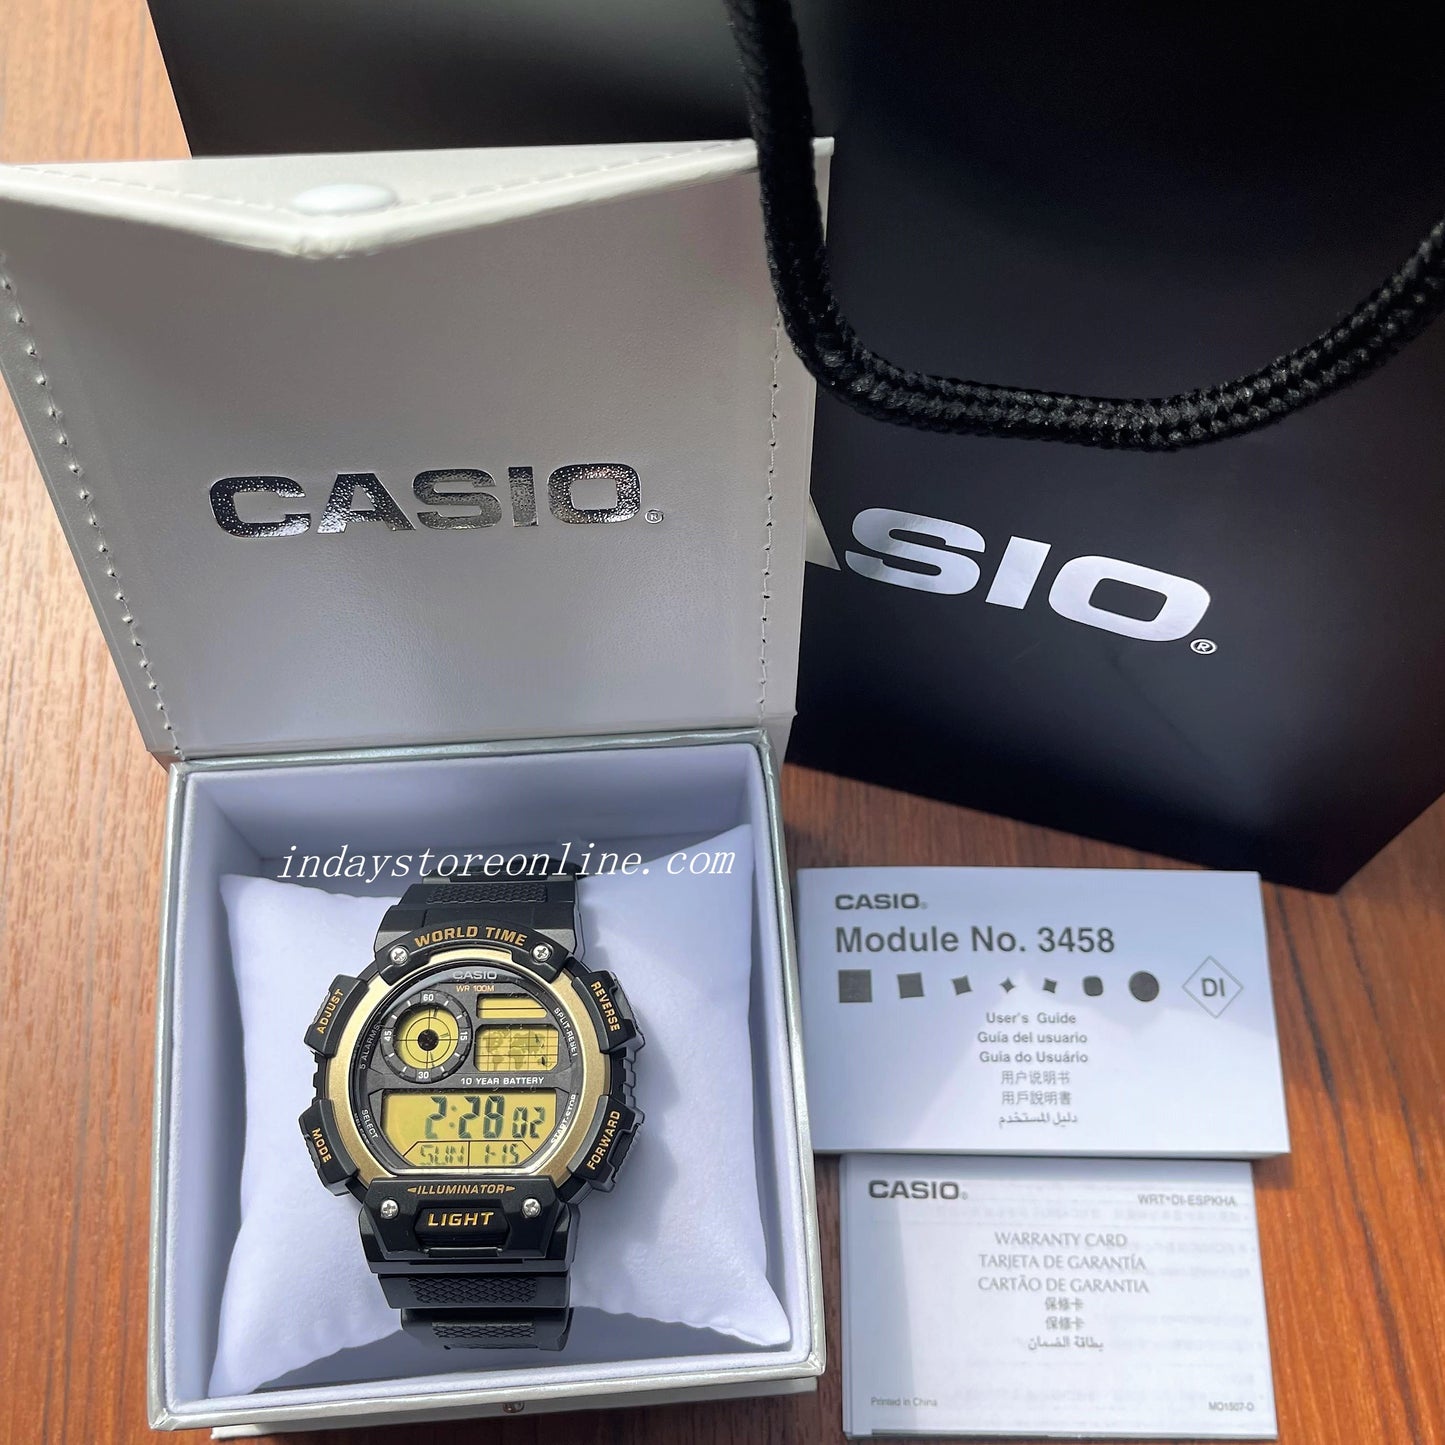 Casio Digital Men's Watch AE-1400WH-9A Digital Resin Band Resin Glass Battery life: 10 years